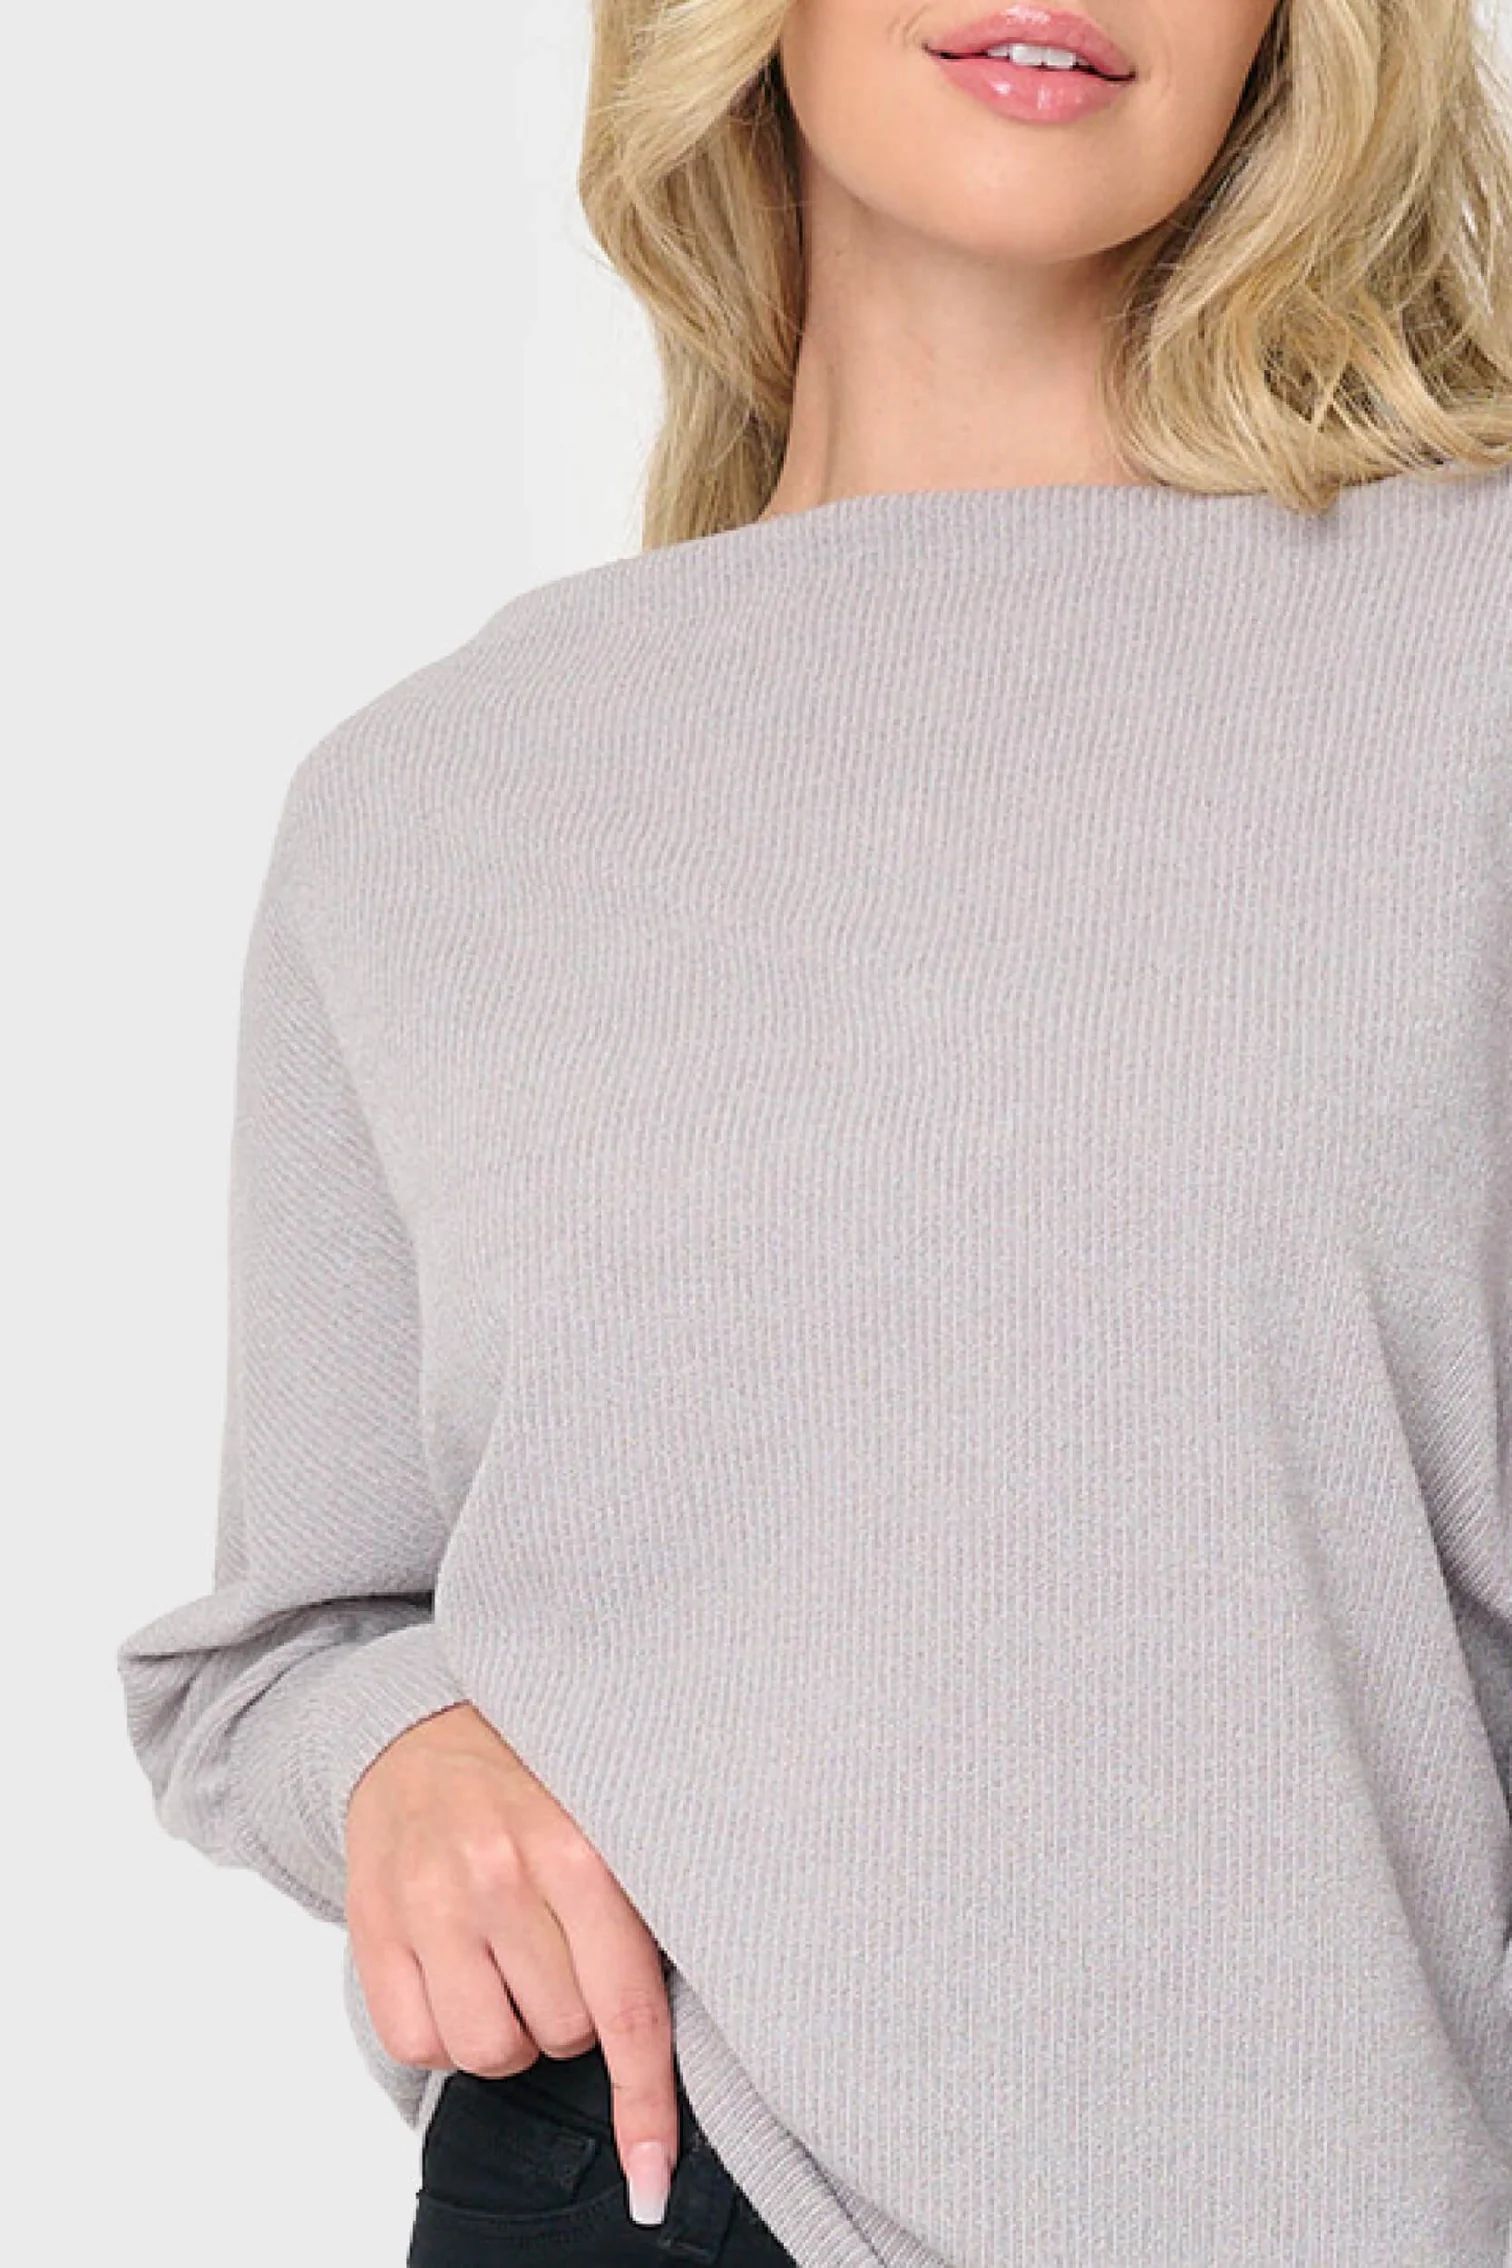 Slouchy Knit Chenille Open Neck Sweater | Gibson